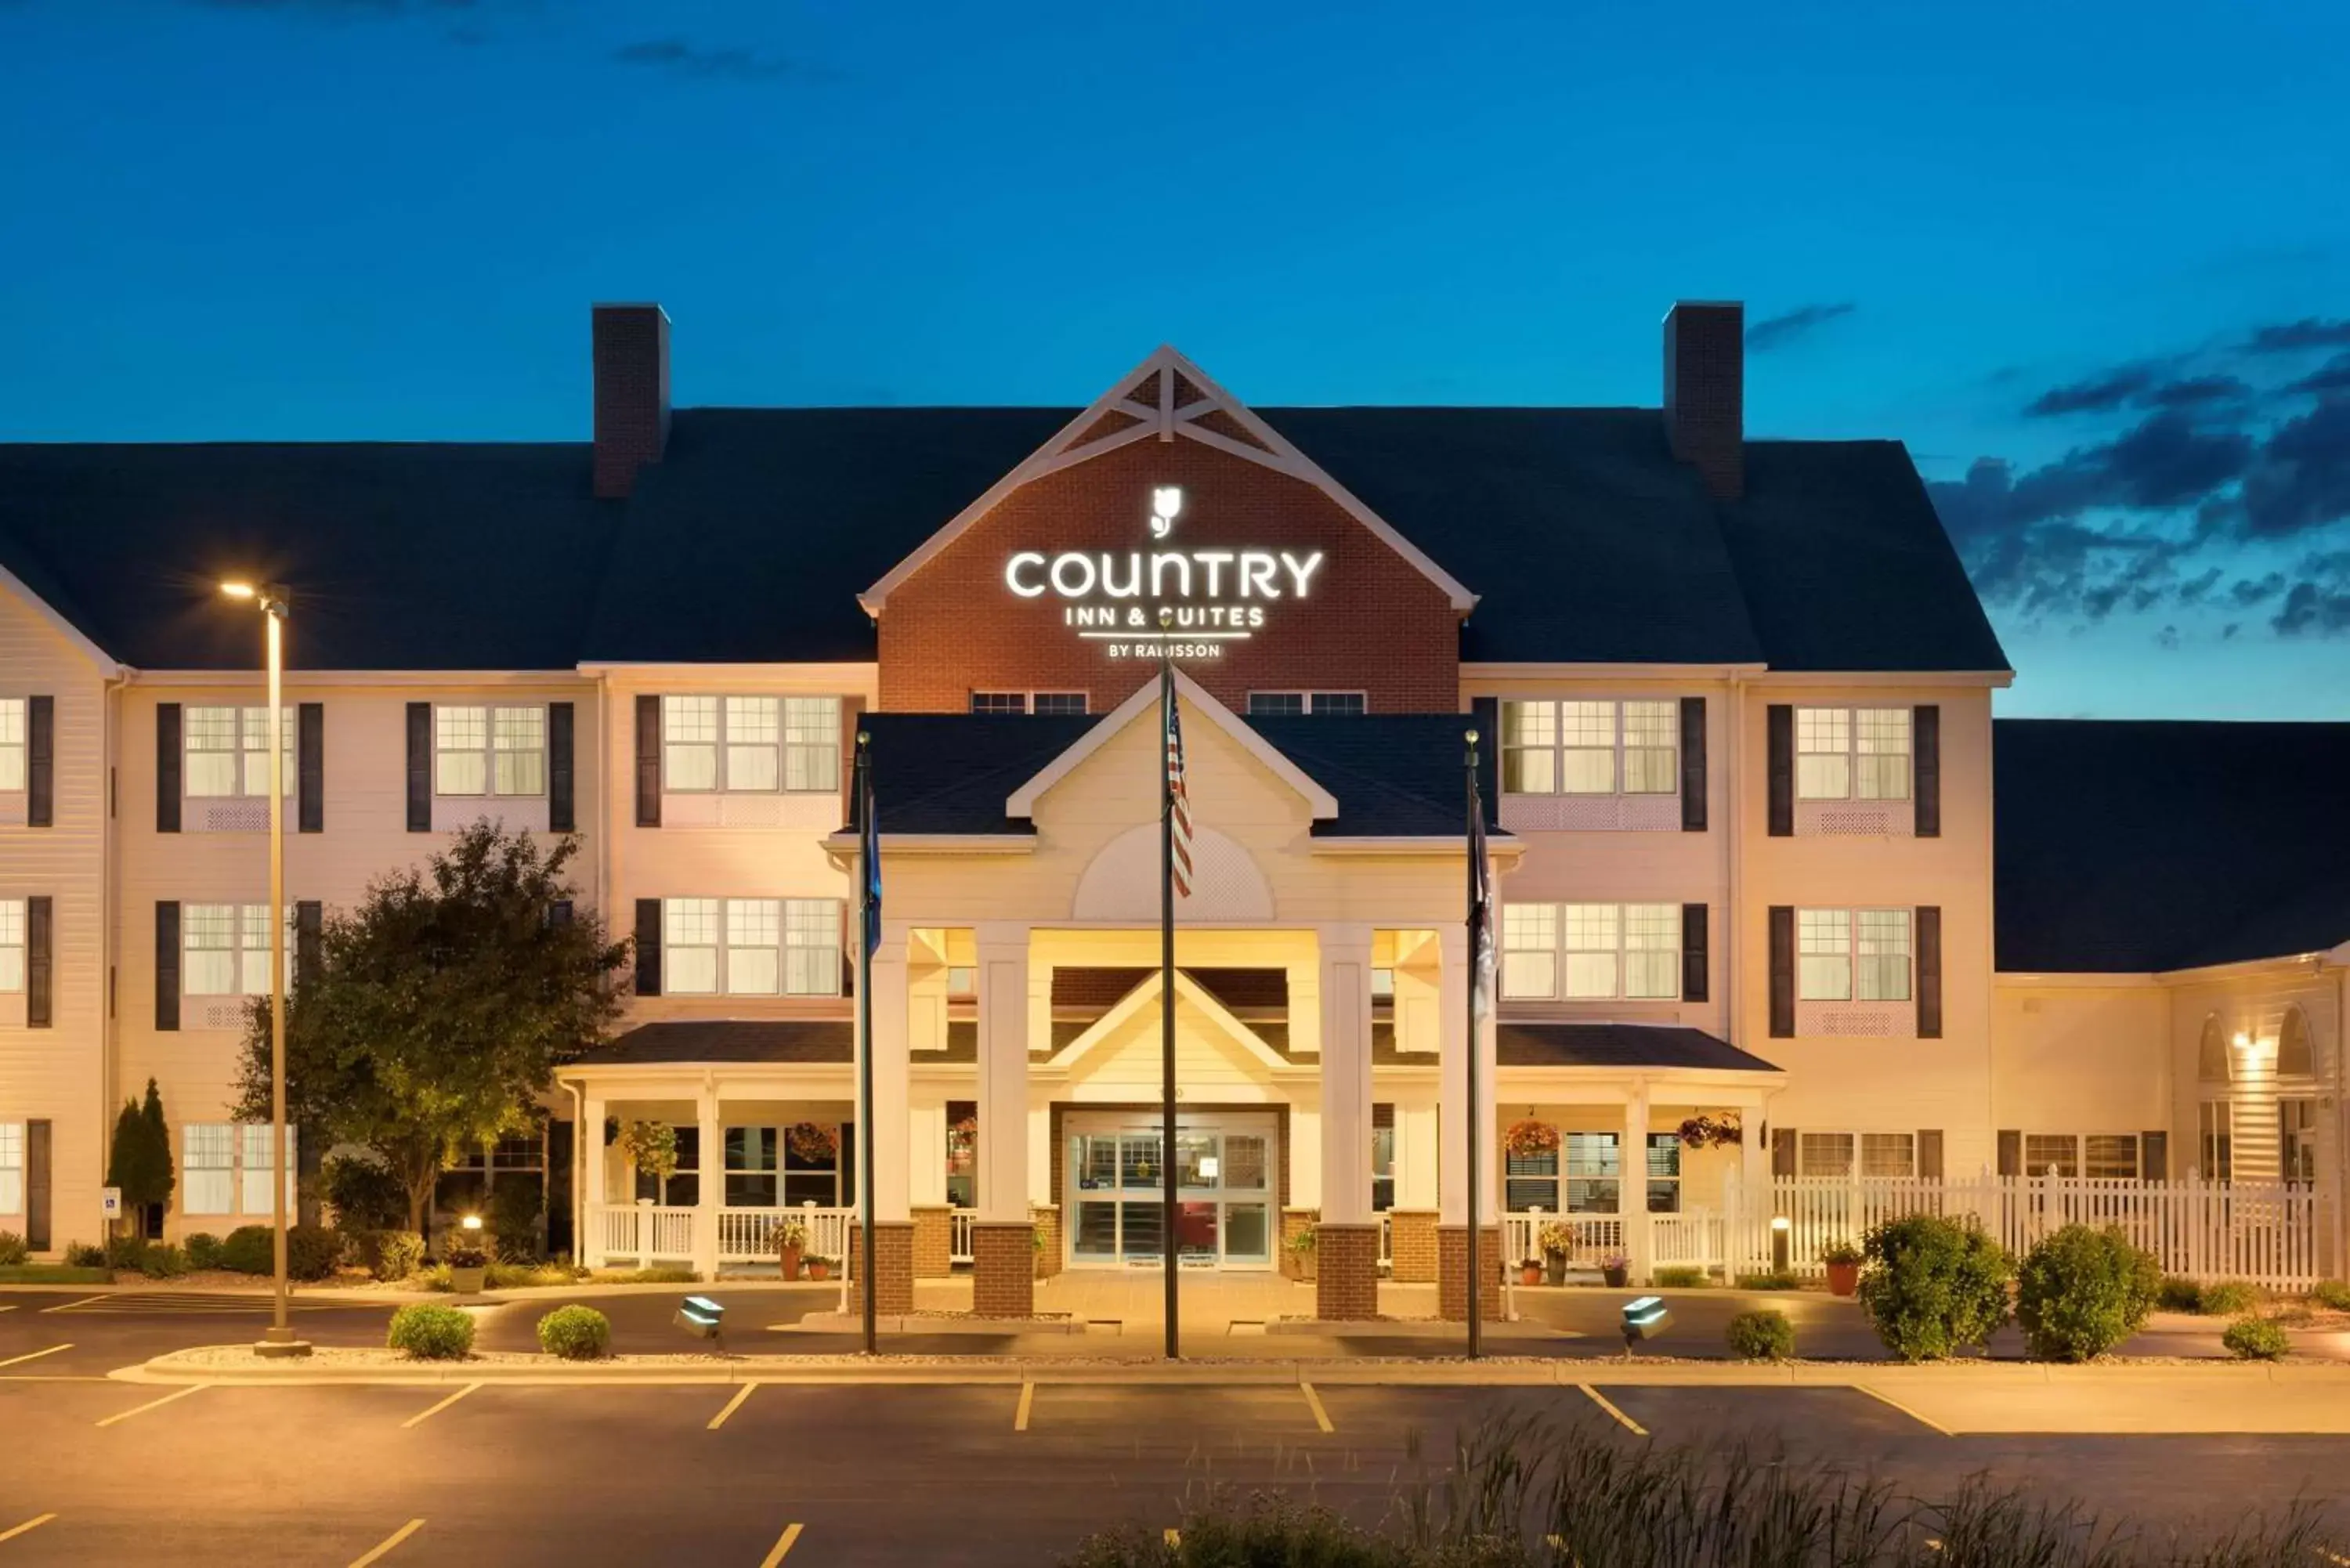 Property building in Country Inn & Suites by Radisson, Appleton North, WI